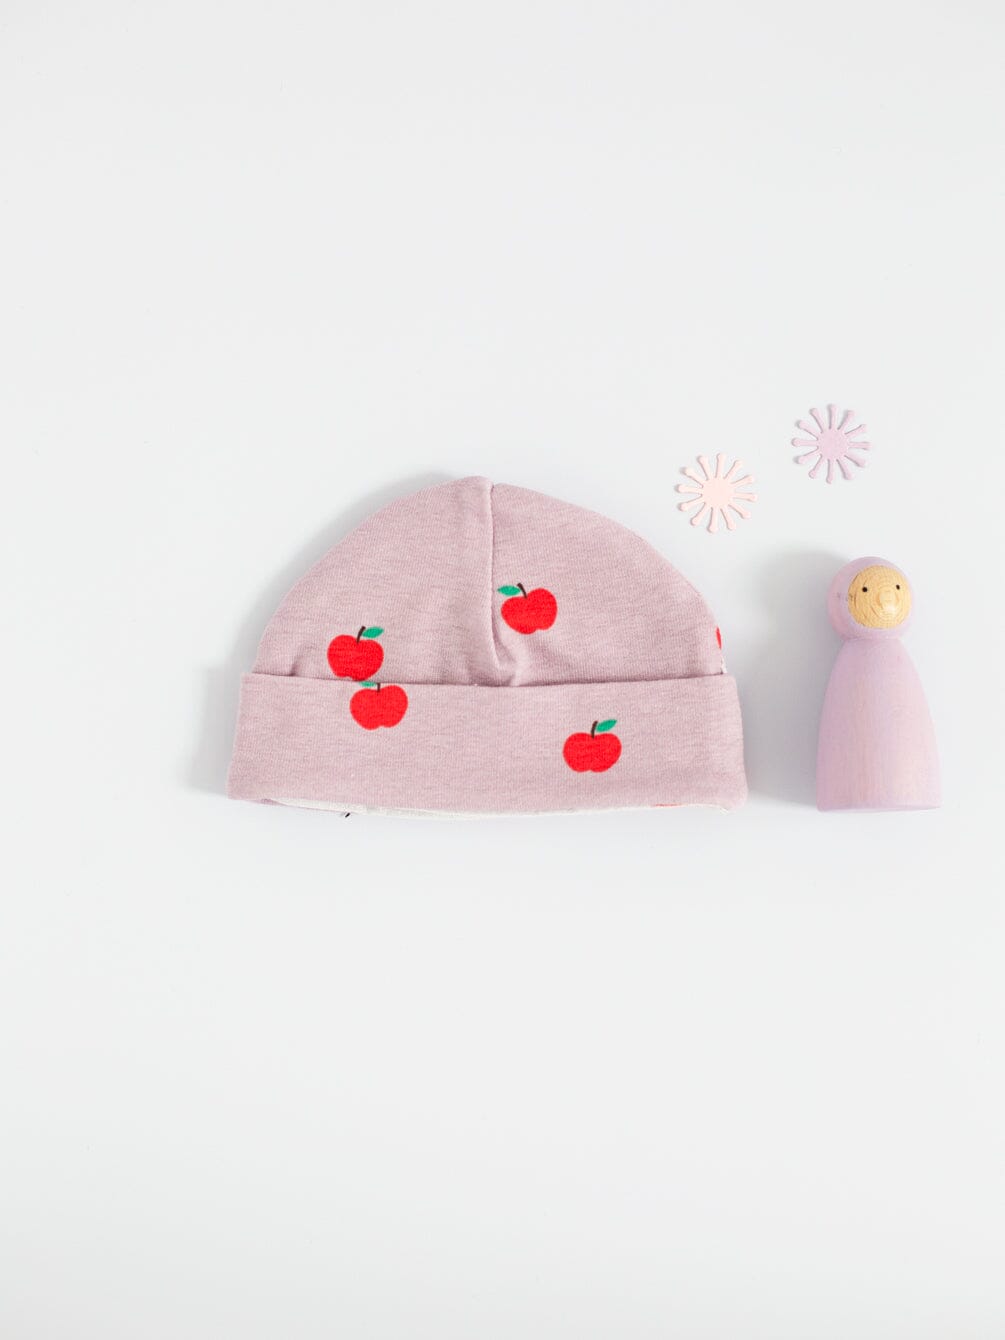 Preemie Round Hat, Orchard Hat Tiny & Small 